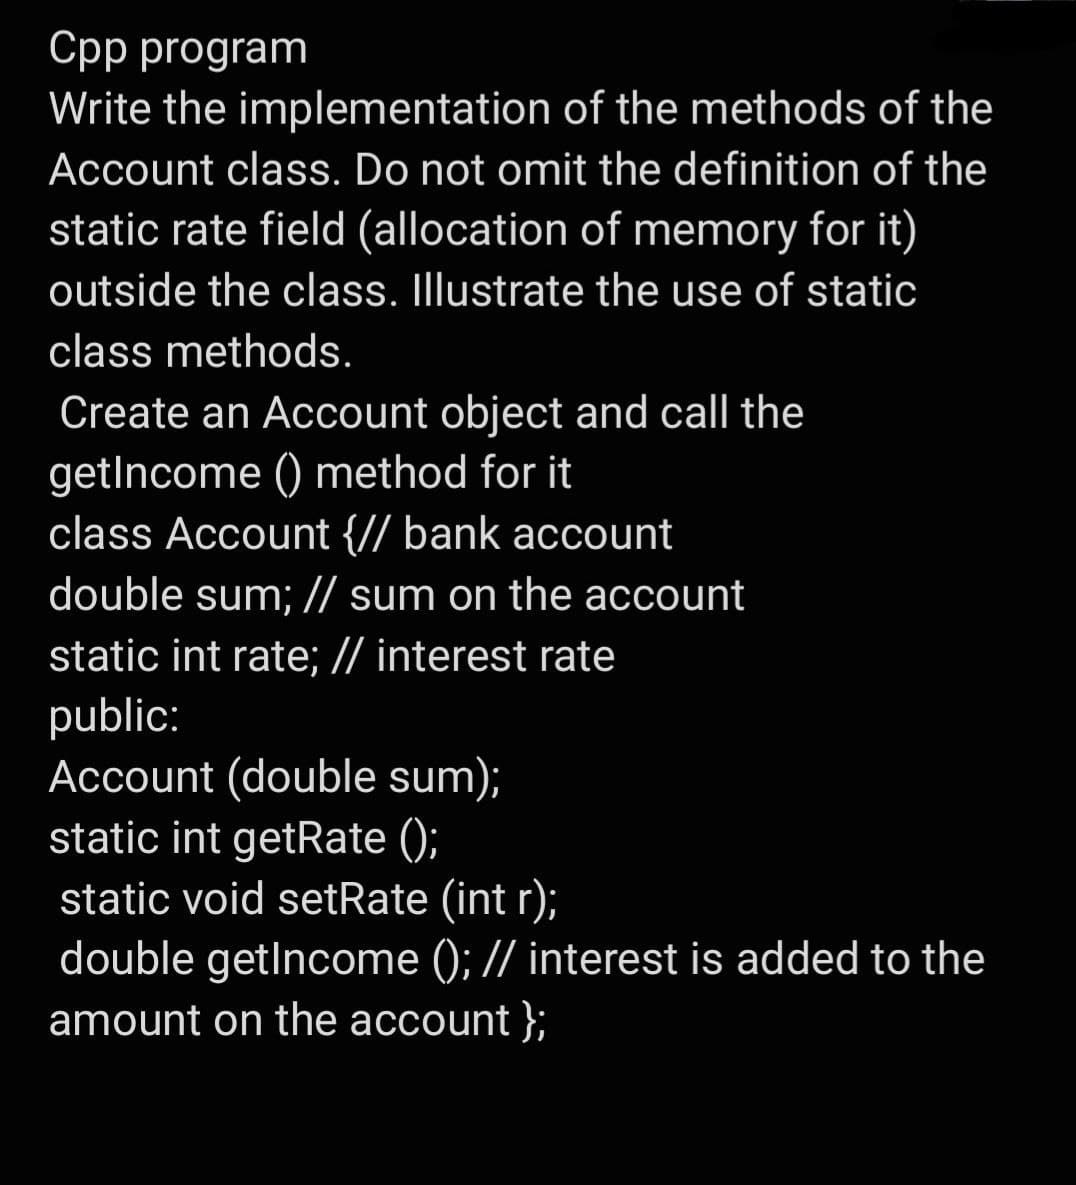 Cpp program
Write the implementation of the methods of the
Account class. Do not omit the definition of the
static rate field (allocation of memory for it)
outside the class. Illustrate the use of static
class methods.
Create an Account object and call the
getIncome () method for it
class Account {// bank account
double sum; // sum on the account
static int rate; // interest rate
public:
Account (double sum);
static int getRate ();
static void setRate (int r);
double getlncome (); // interest is added to the
amount on the account };
